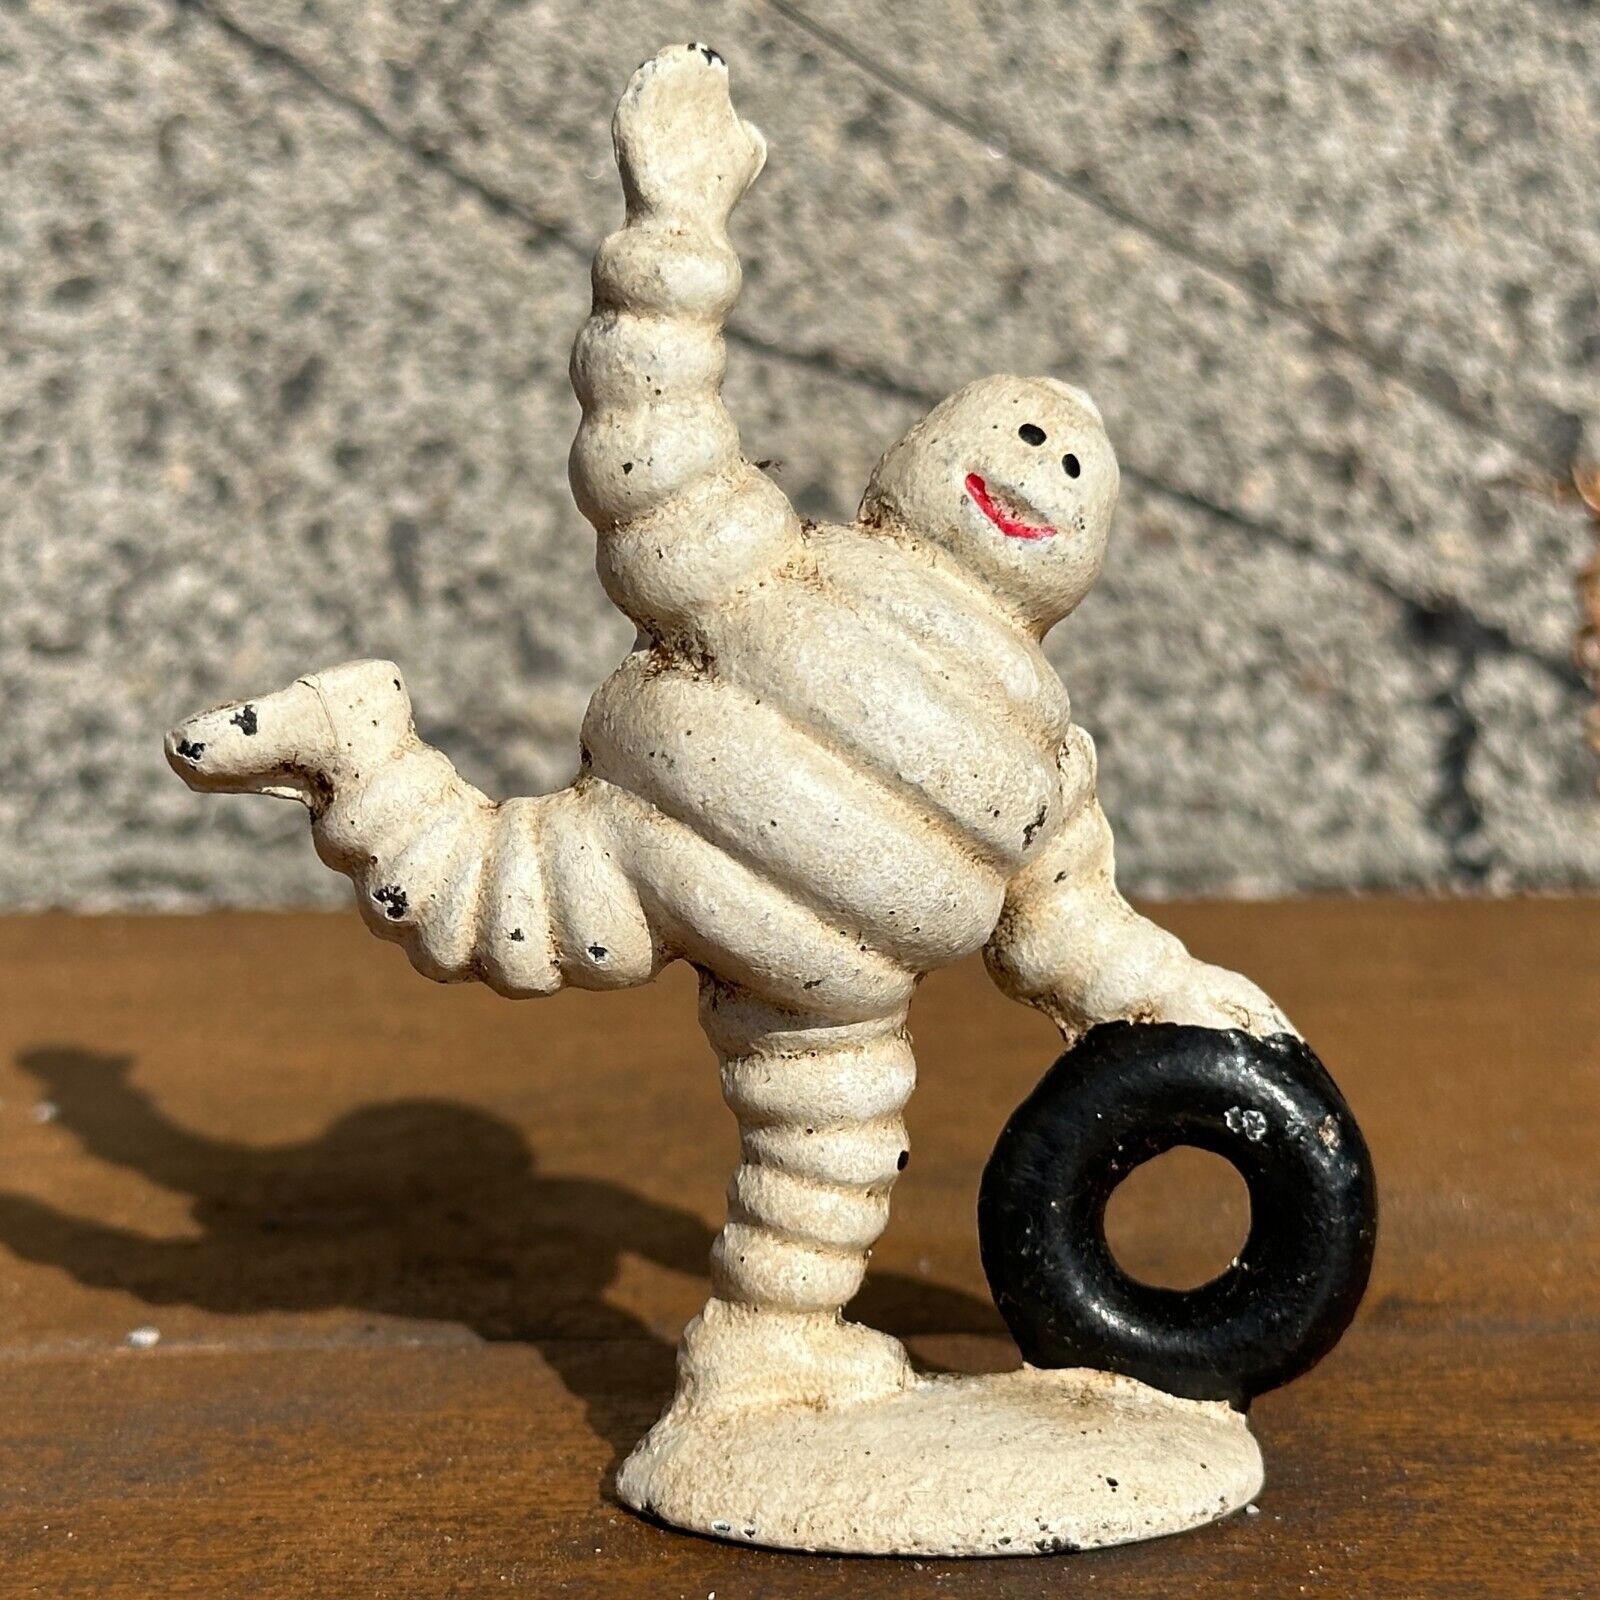 Michelin Mini Rolling Tire Man Cast Iron Paperweight Novelty Home Decor Antiqued